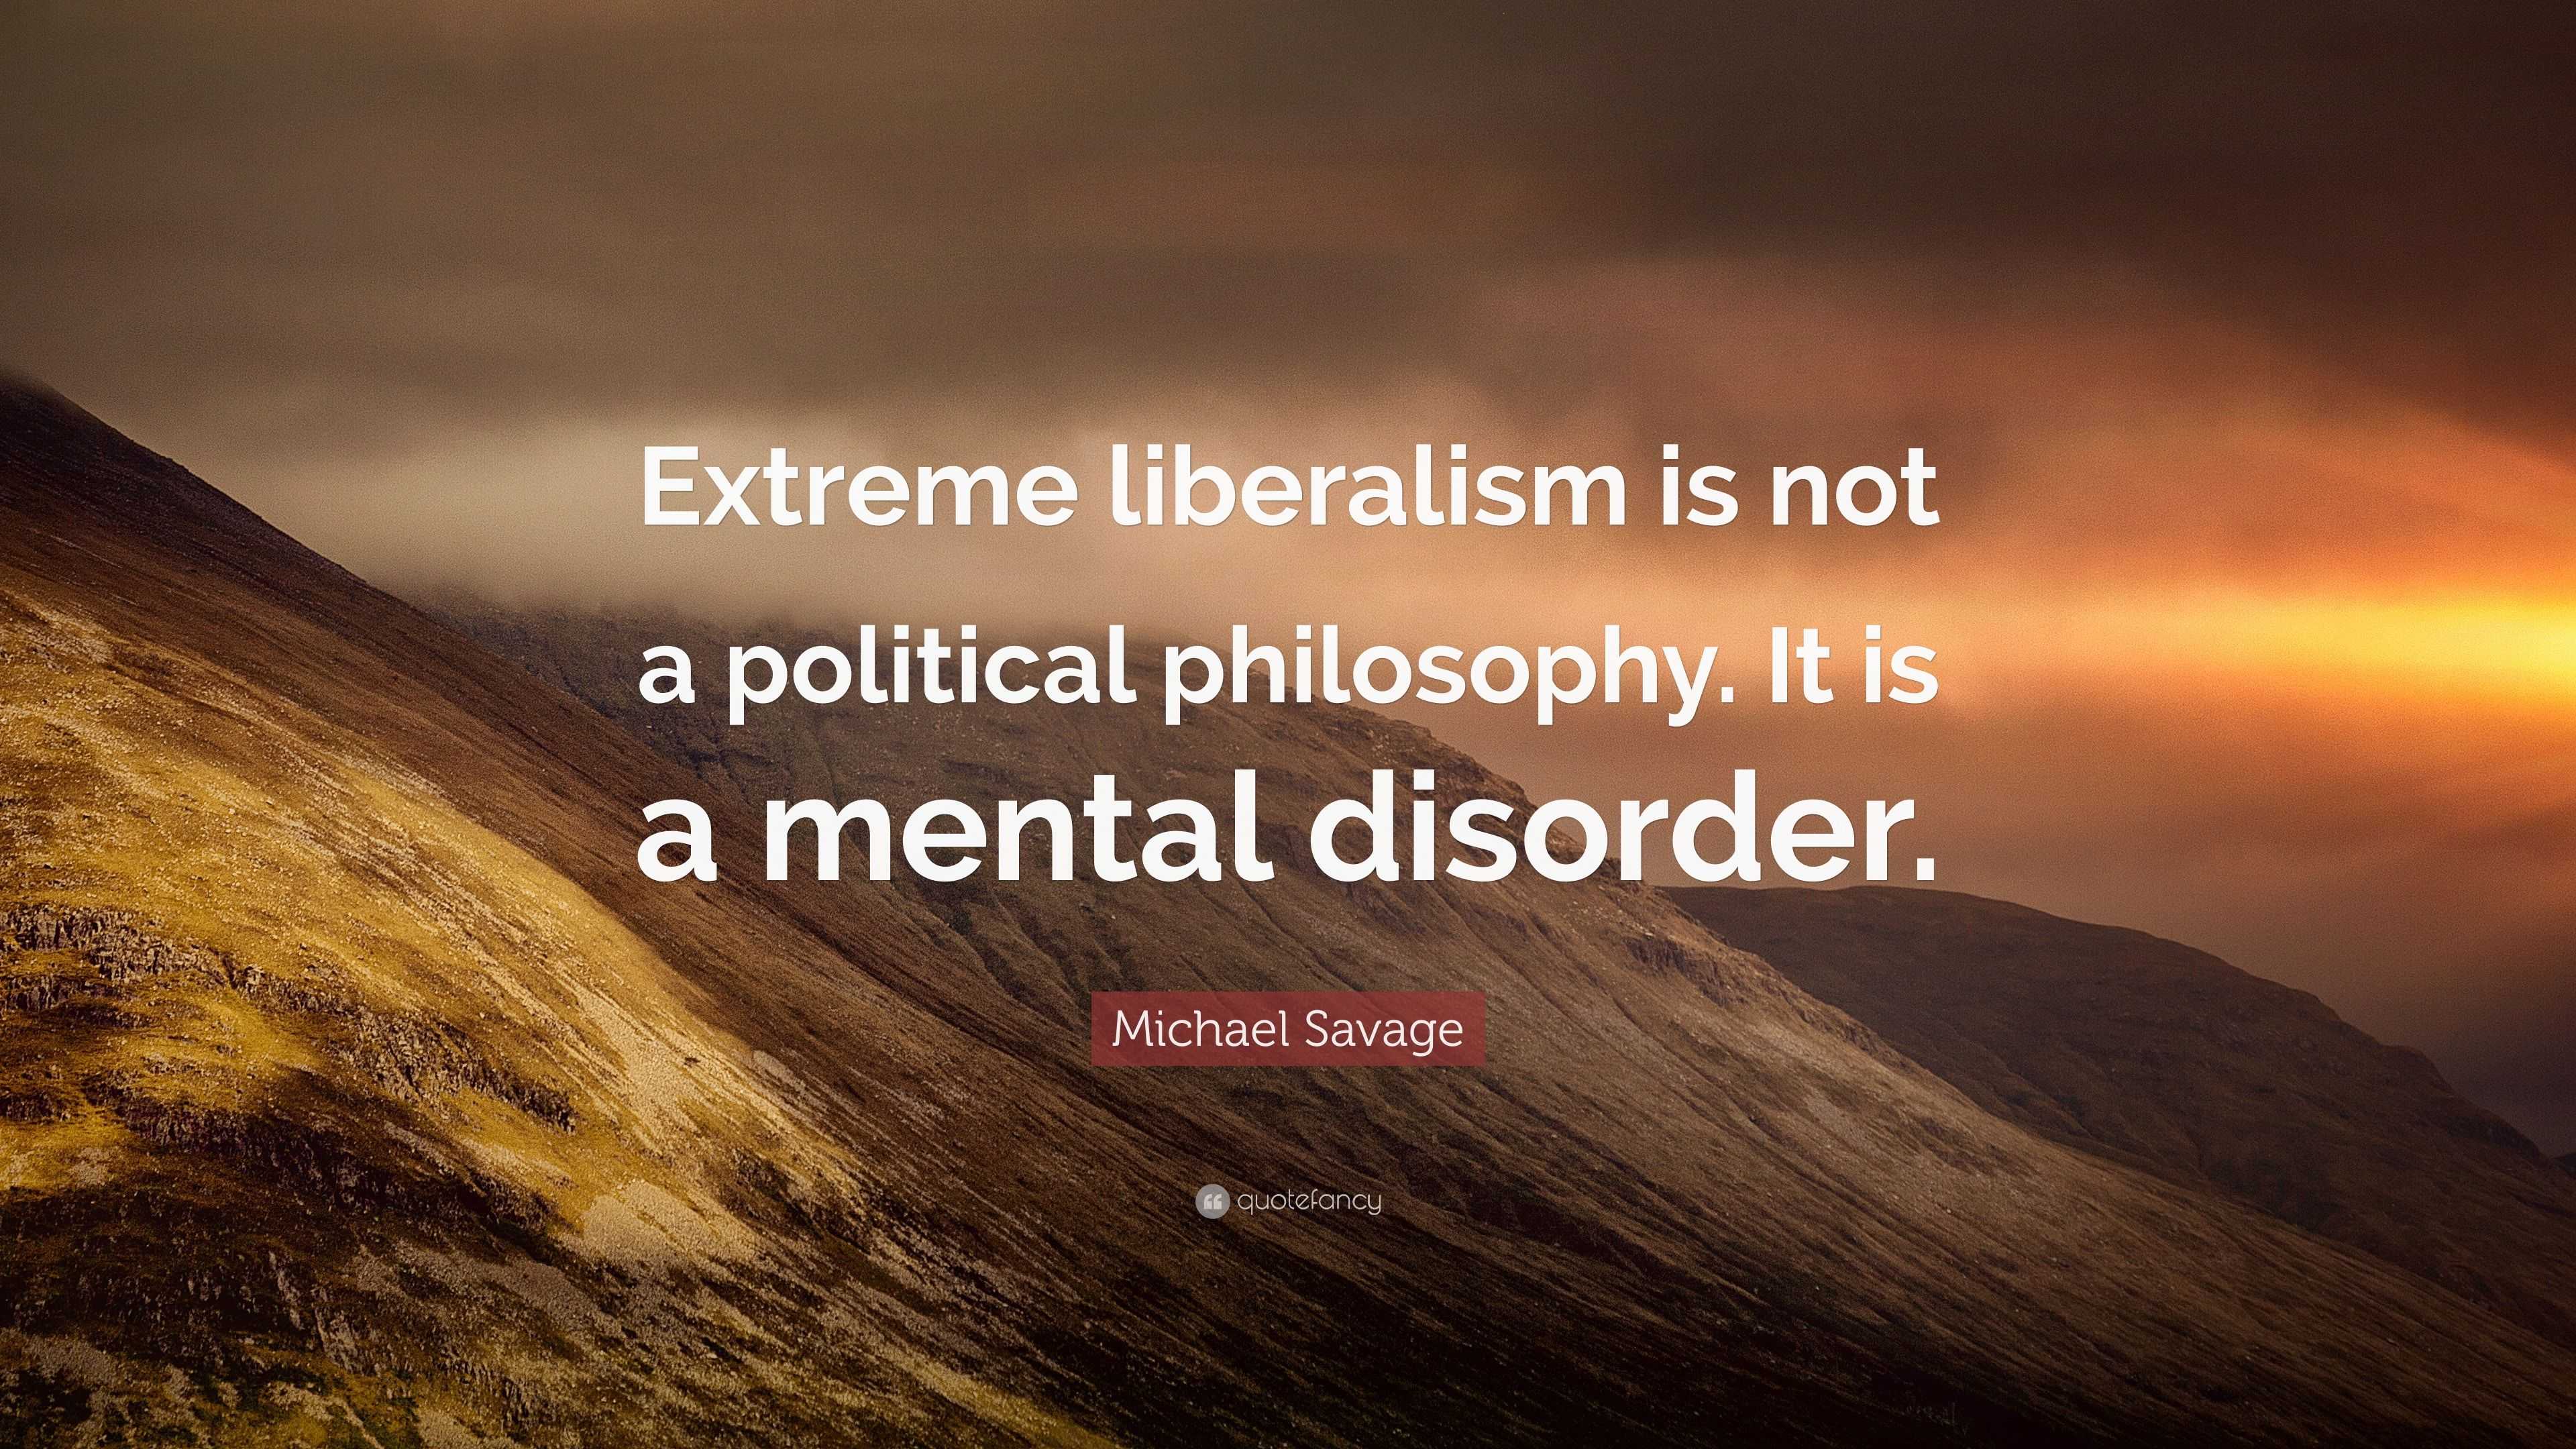 Michael Savage Quote: “Extreme liberalism is not a political philosophy. It  is a mental disorder.”